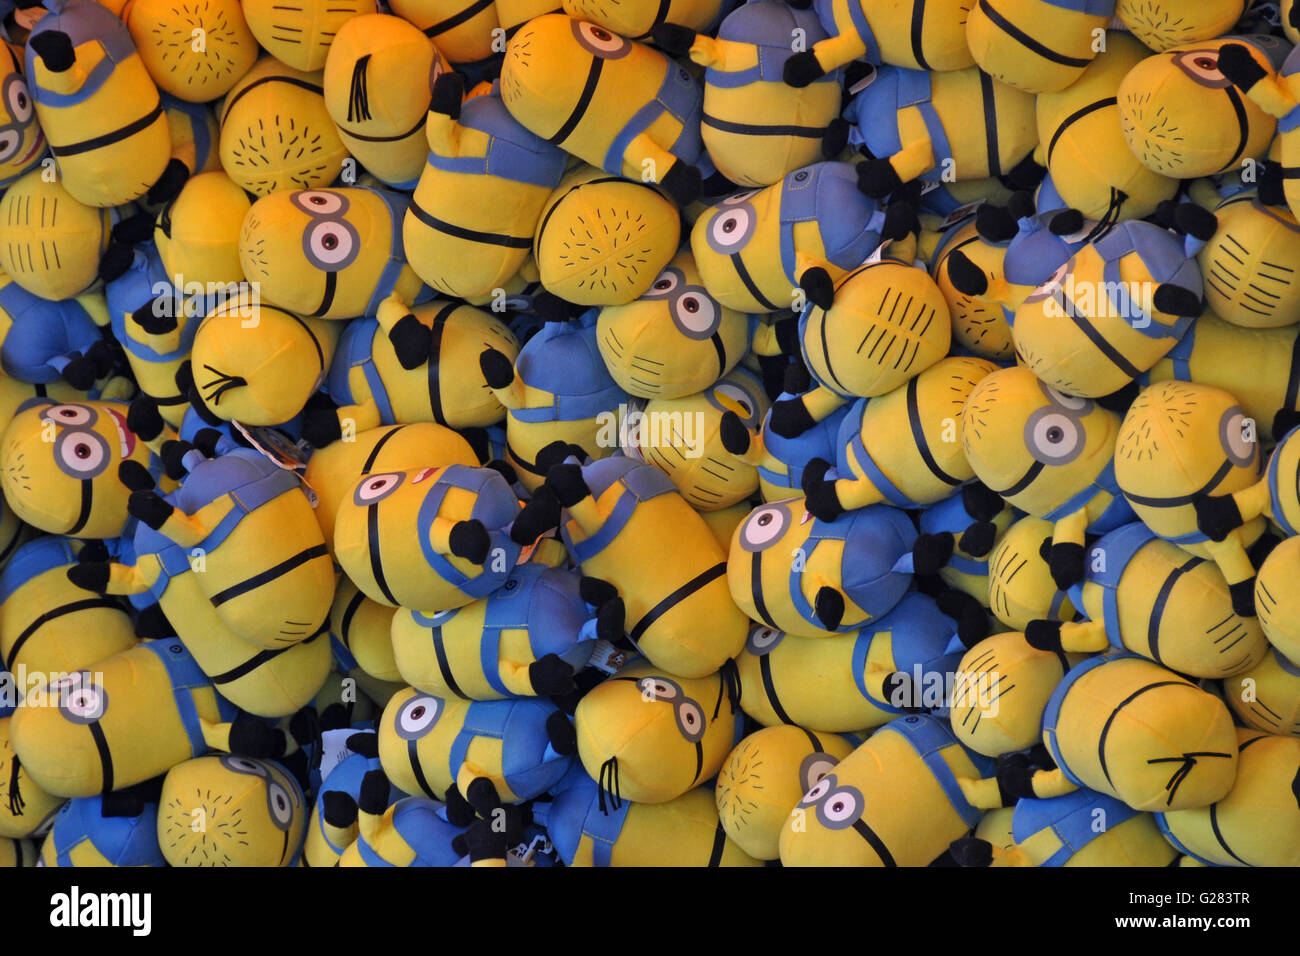 Cuddly toy Minions, prizes at a fairground stall Stock Photo